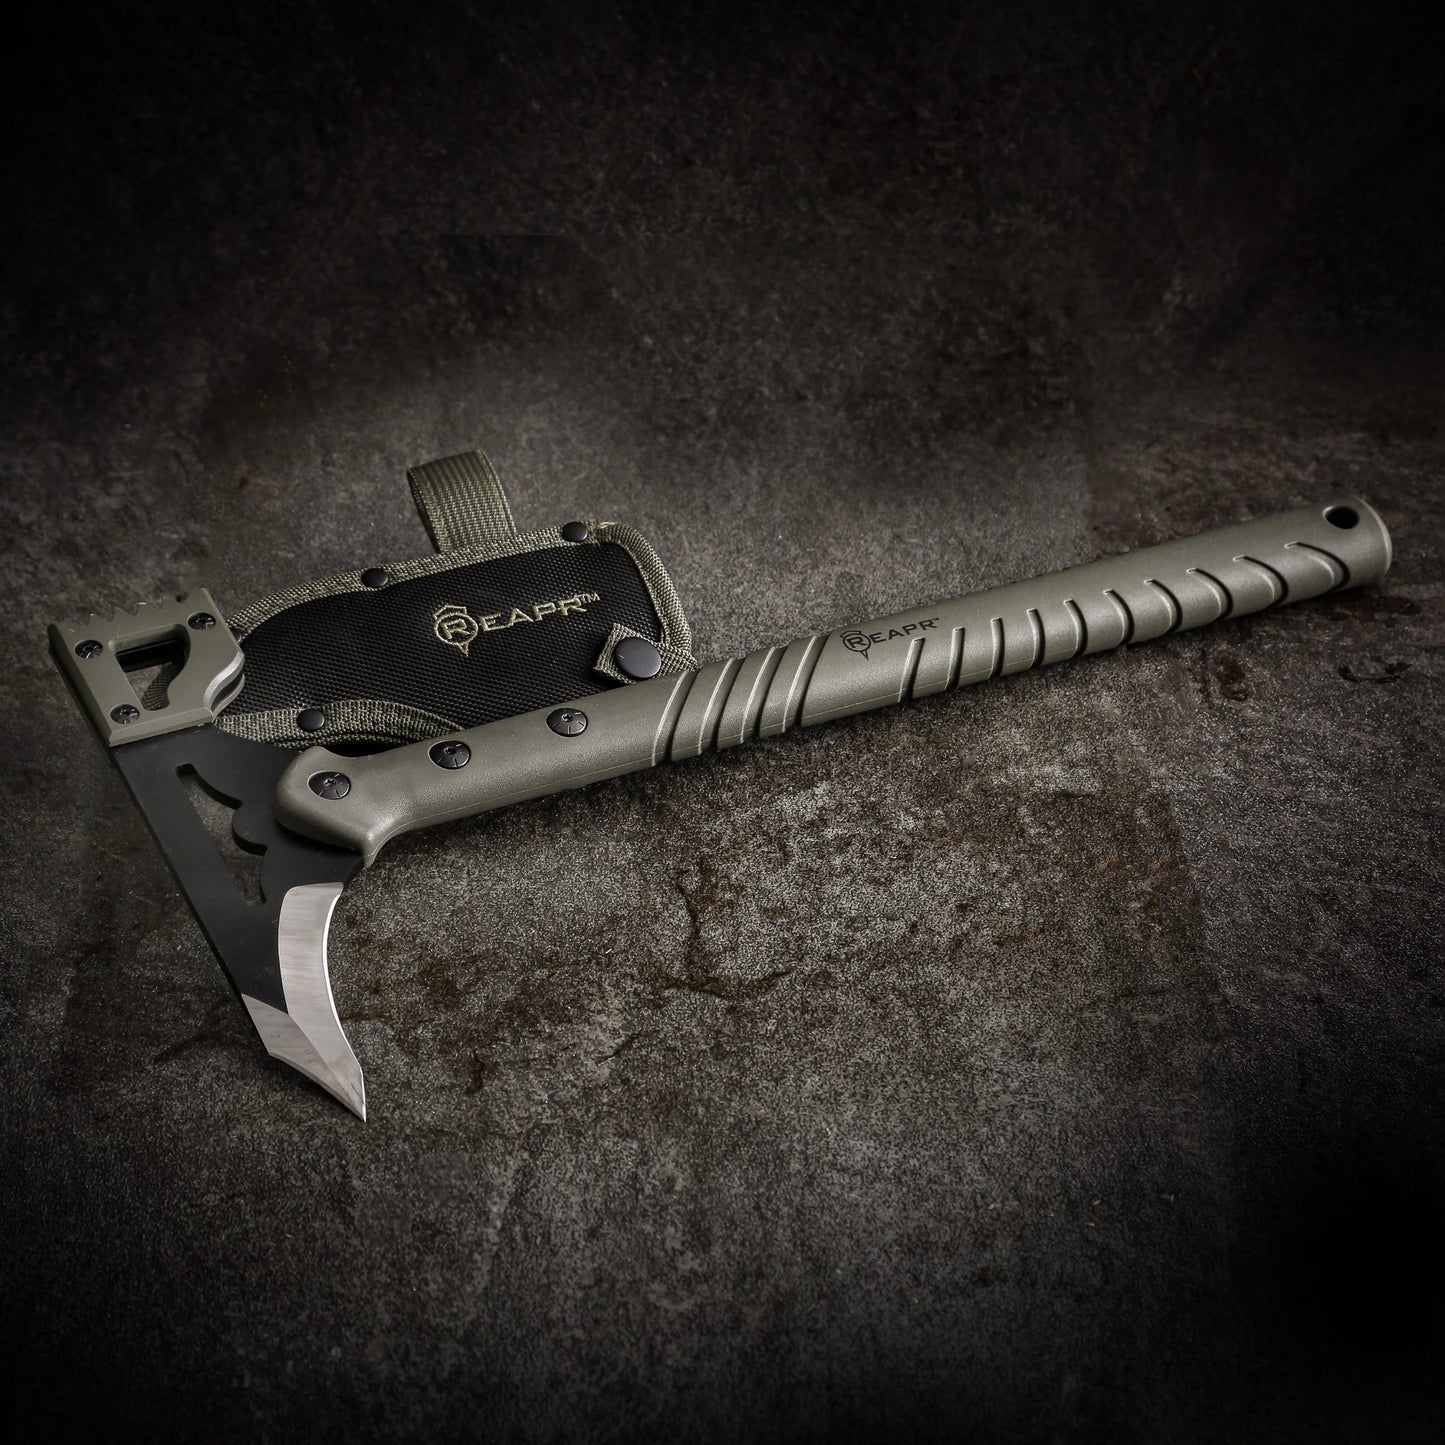 Channel your inner  warrior  with  the  superbly crafted Reapr Battle Hammer. The head features a destructive deep-milled  hammer face that will  demolish  and pummel with ferocious efficiency as well as a sharp spiked blade for extreme  piercing. www.defenceqstore.com.au